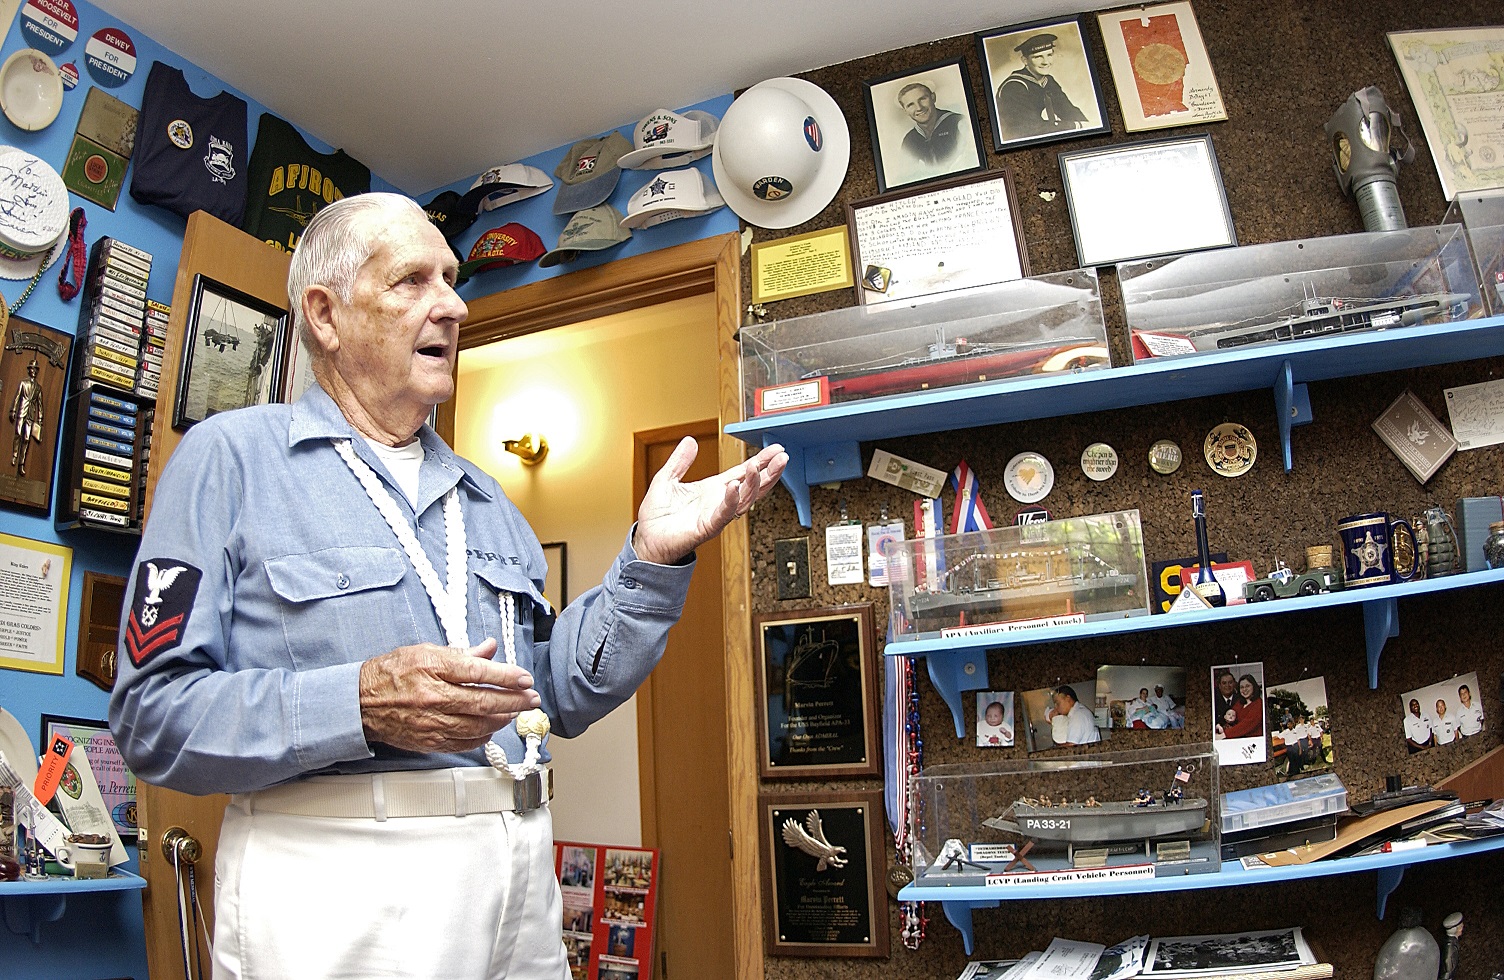 A photograph of Marin Perrett displaying his collection of mementos and memorabilia at his home. (U.S. Coast Guard photo by Petty Officer 3rd Class NyxoLyno Cangemi)